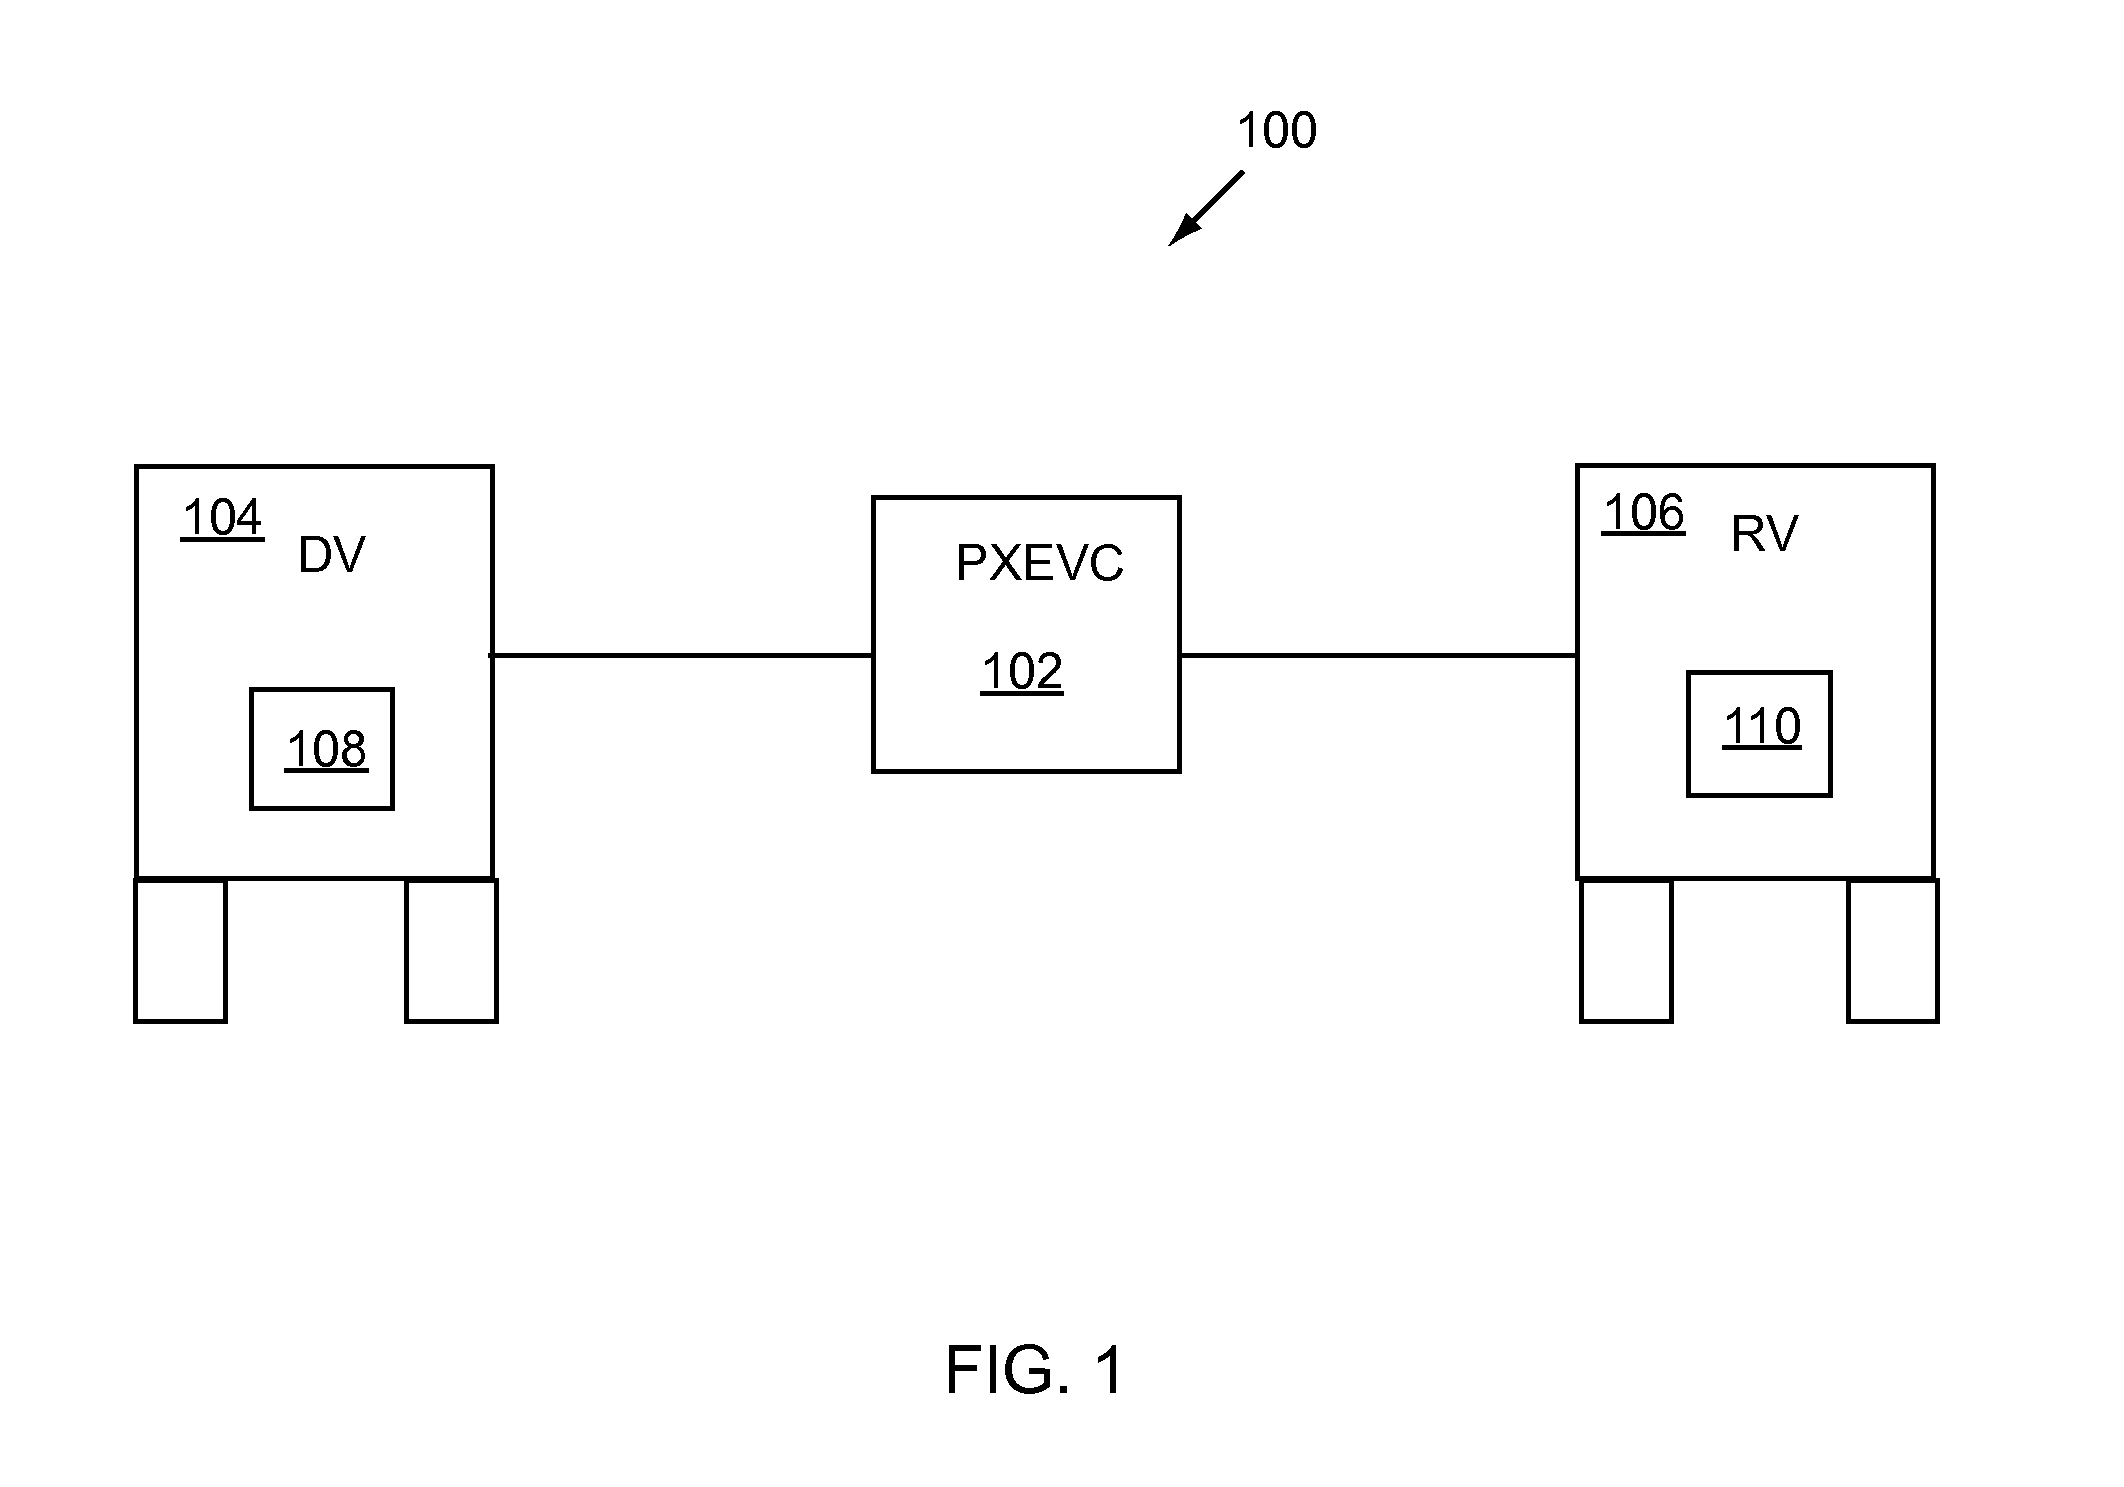 Method and Apparatus for High-Voltage DC Charging of Battery-Electric and Plug-in Hybrid Electric Vehicles